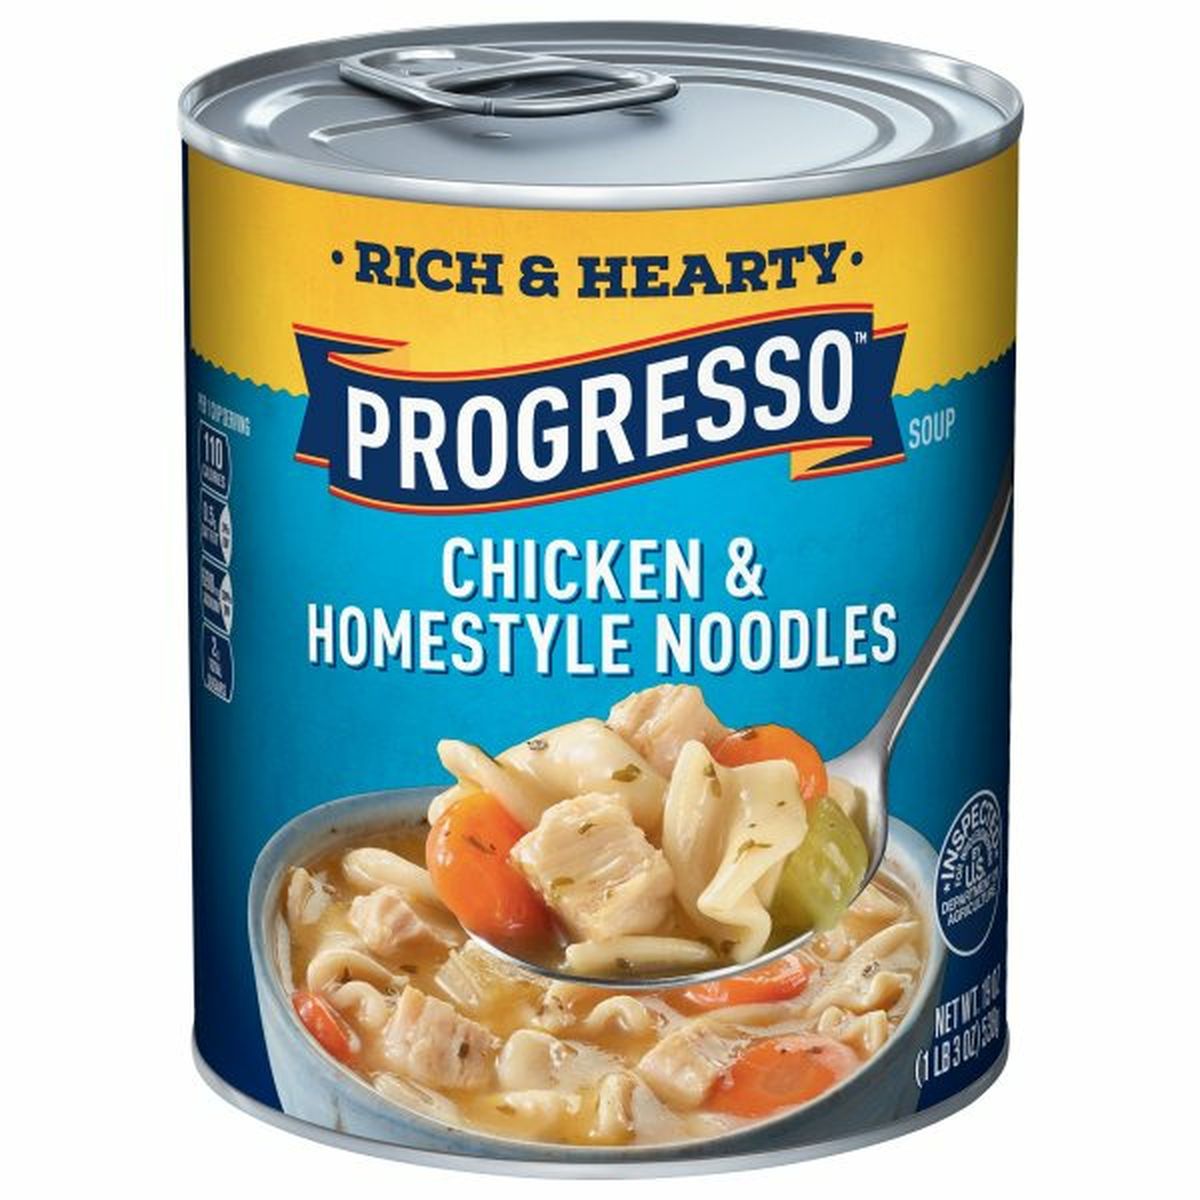 Calories in Progresso Soup, Chicken & Homestyle Noodles, Rich & Hearty